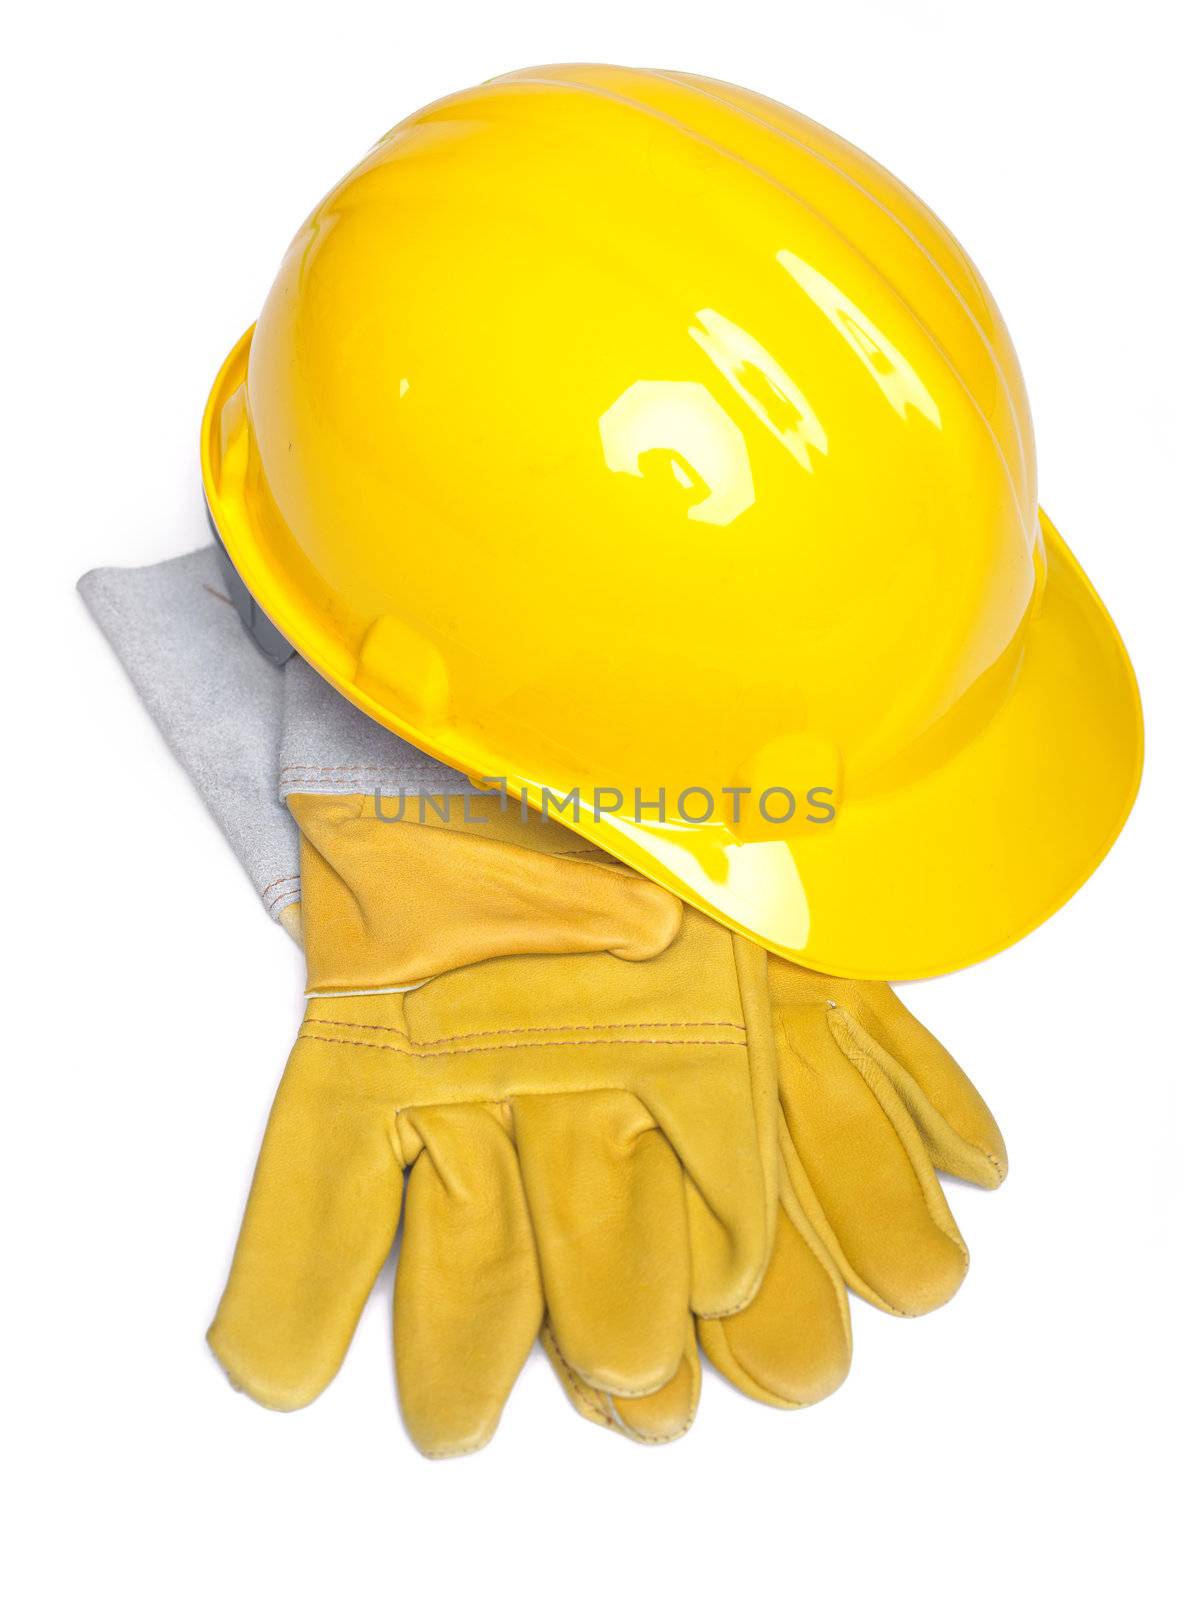 Hard Hat And Leather Gloves by adamr